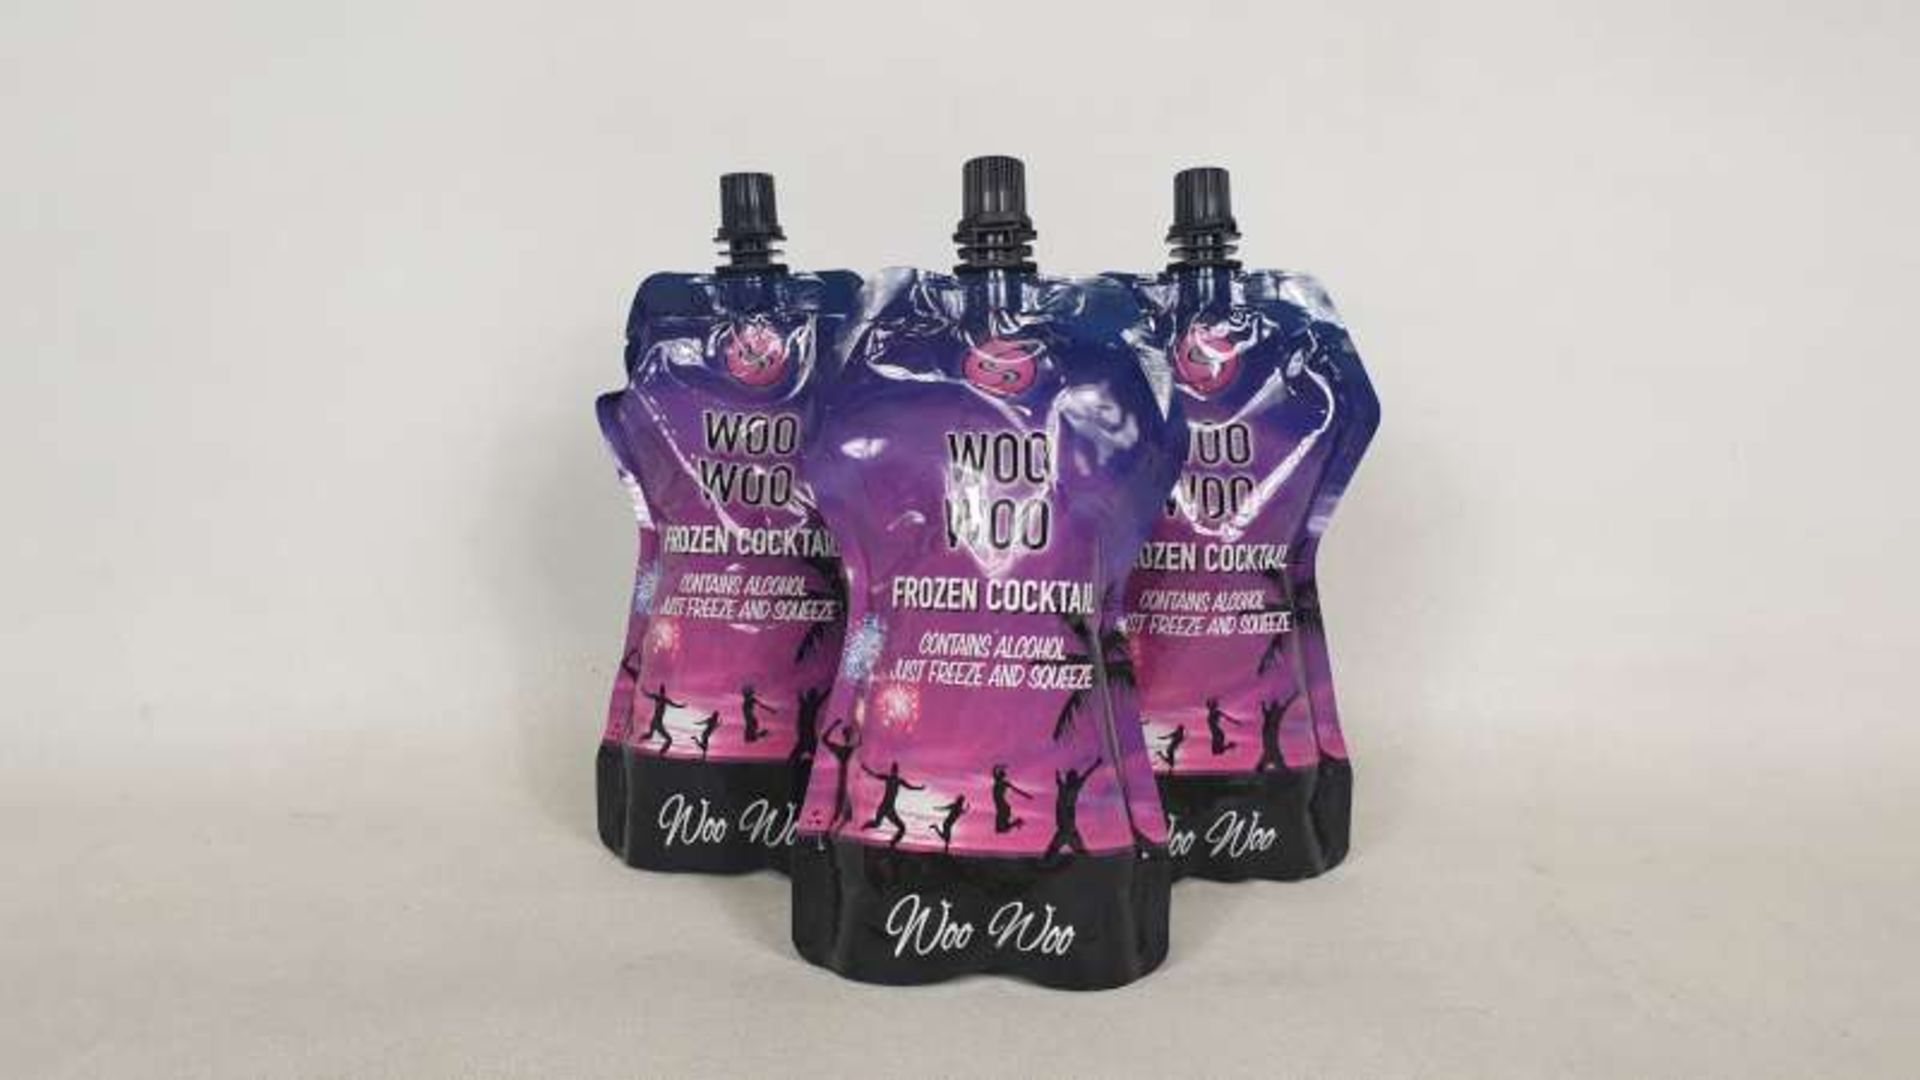 270 X 250ML POUCHES OF WOO WOO FROZEN COCKTAILS IN 30 BOXES BEST BEFORE 29/02/2020